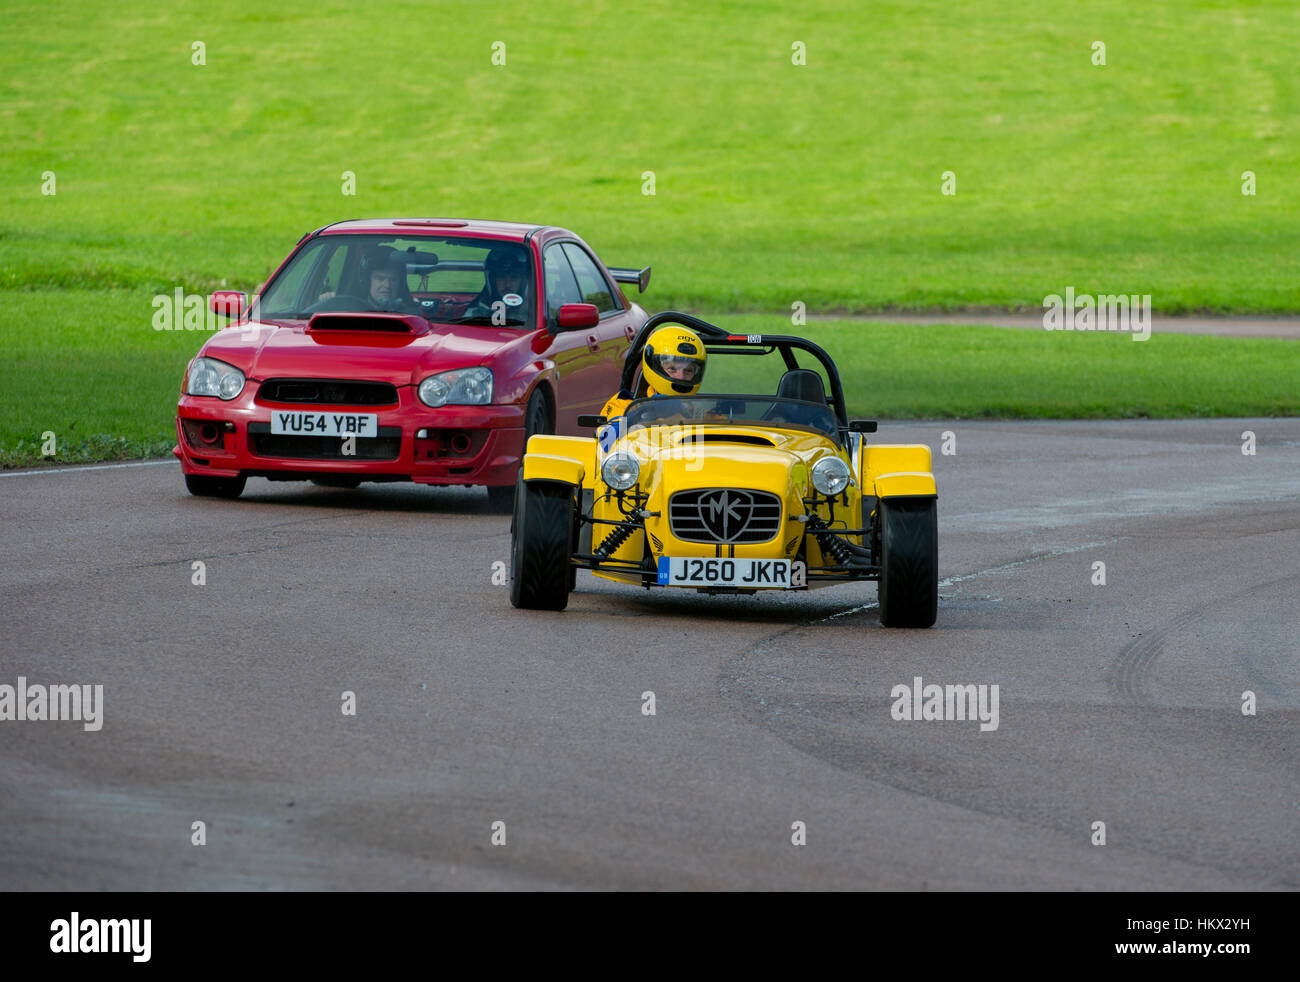 Subaru Impreza chases a Caterham 7 on a track day Lydden Hill race track Stock Photo